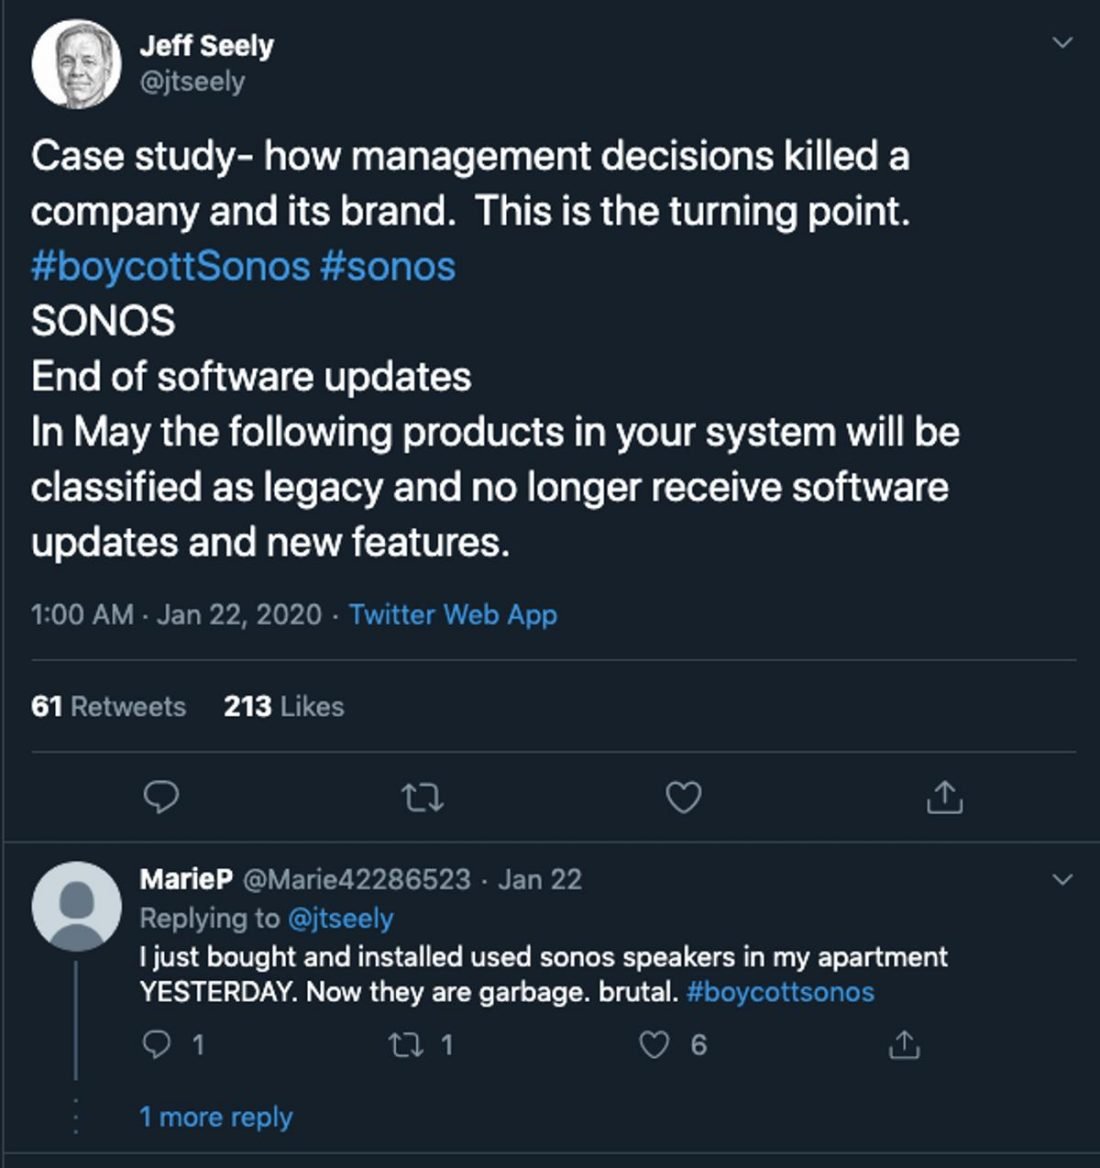 Sonos loses scores of customers, as shown in Tweets with the hashtag boycottSonos.